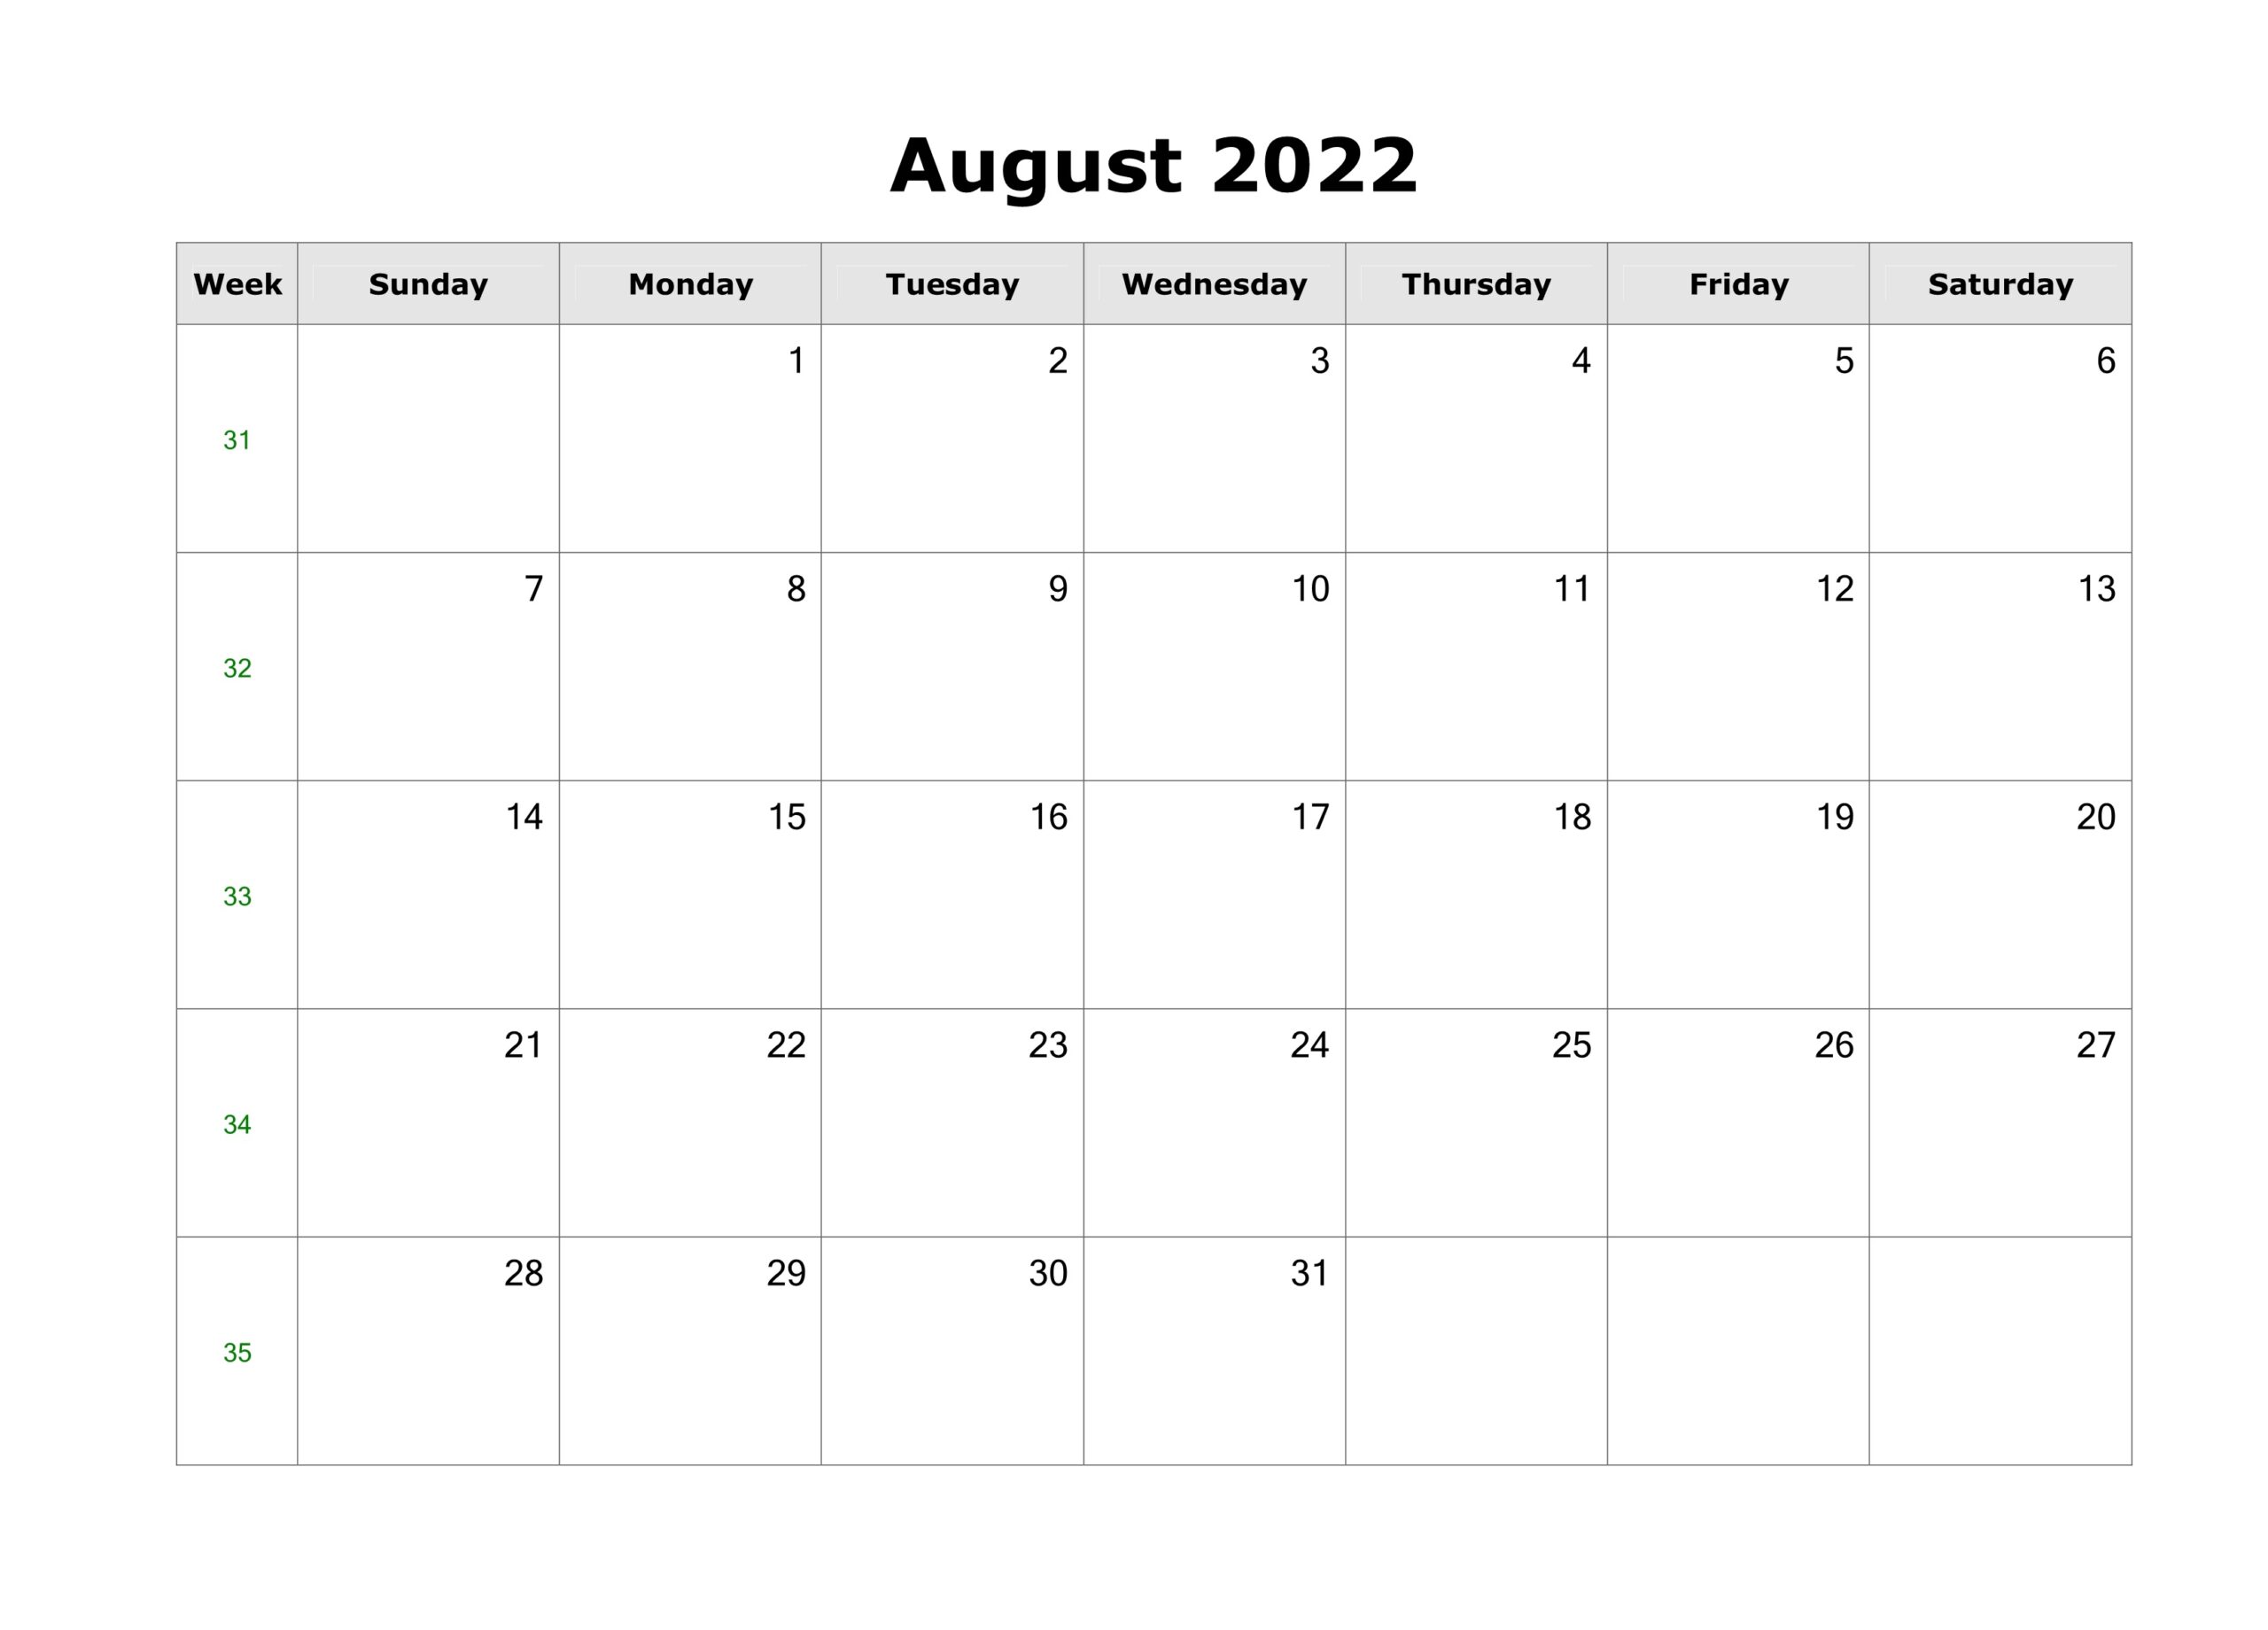 August 2022 Calendar With Holidays Planner